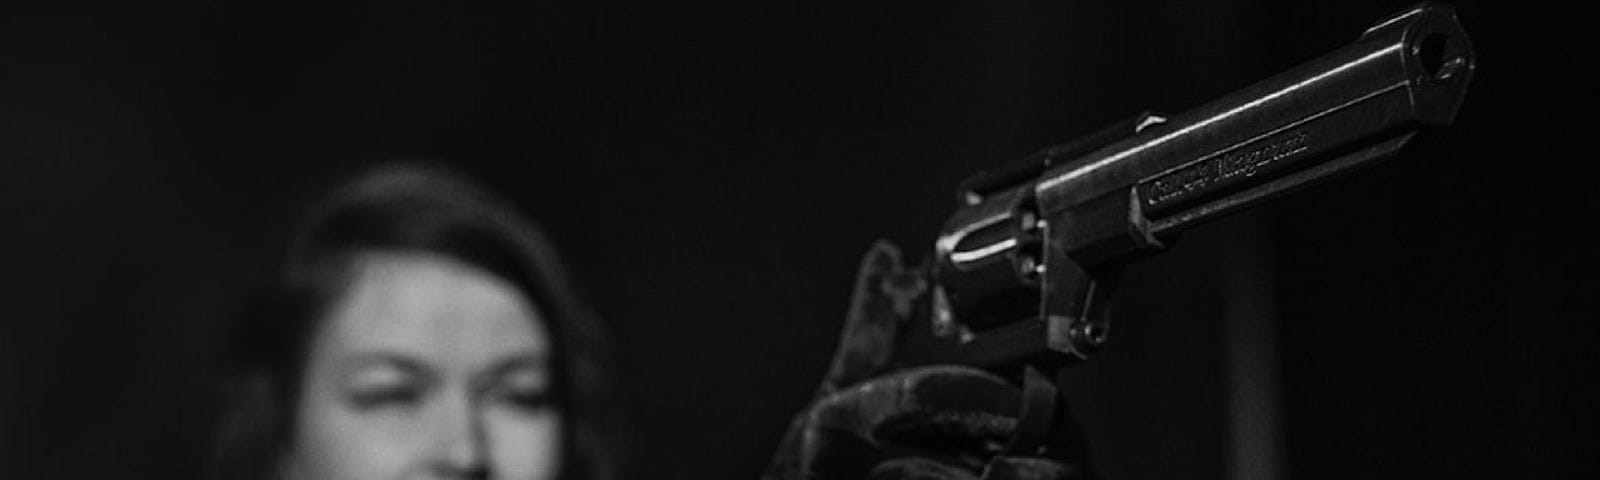 A black and white photo of a woman in an evening dress, wearing long velvet gloves. She holds a revolver in her hand and aims it at somewhere outside the picture. The camera focuses on the gun, while the woman’s face is out of focus.